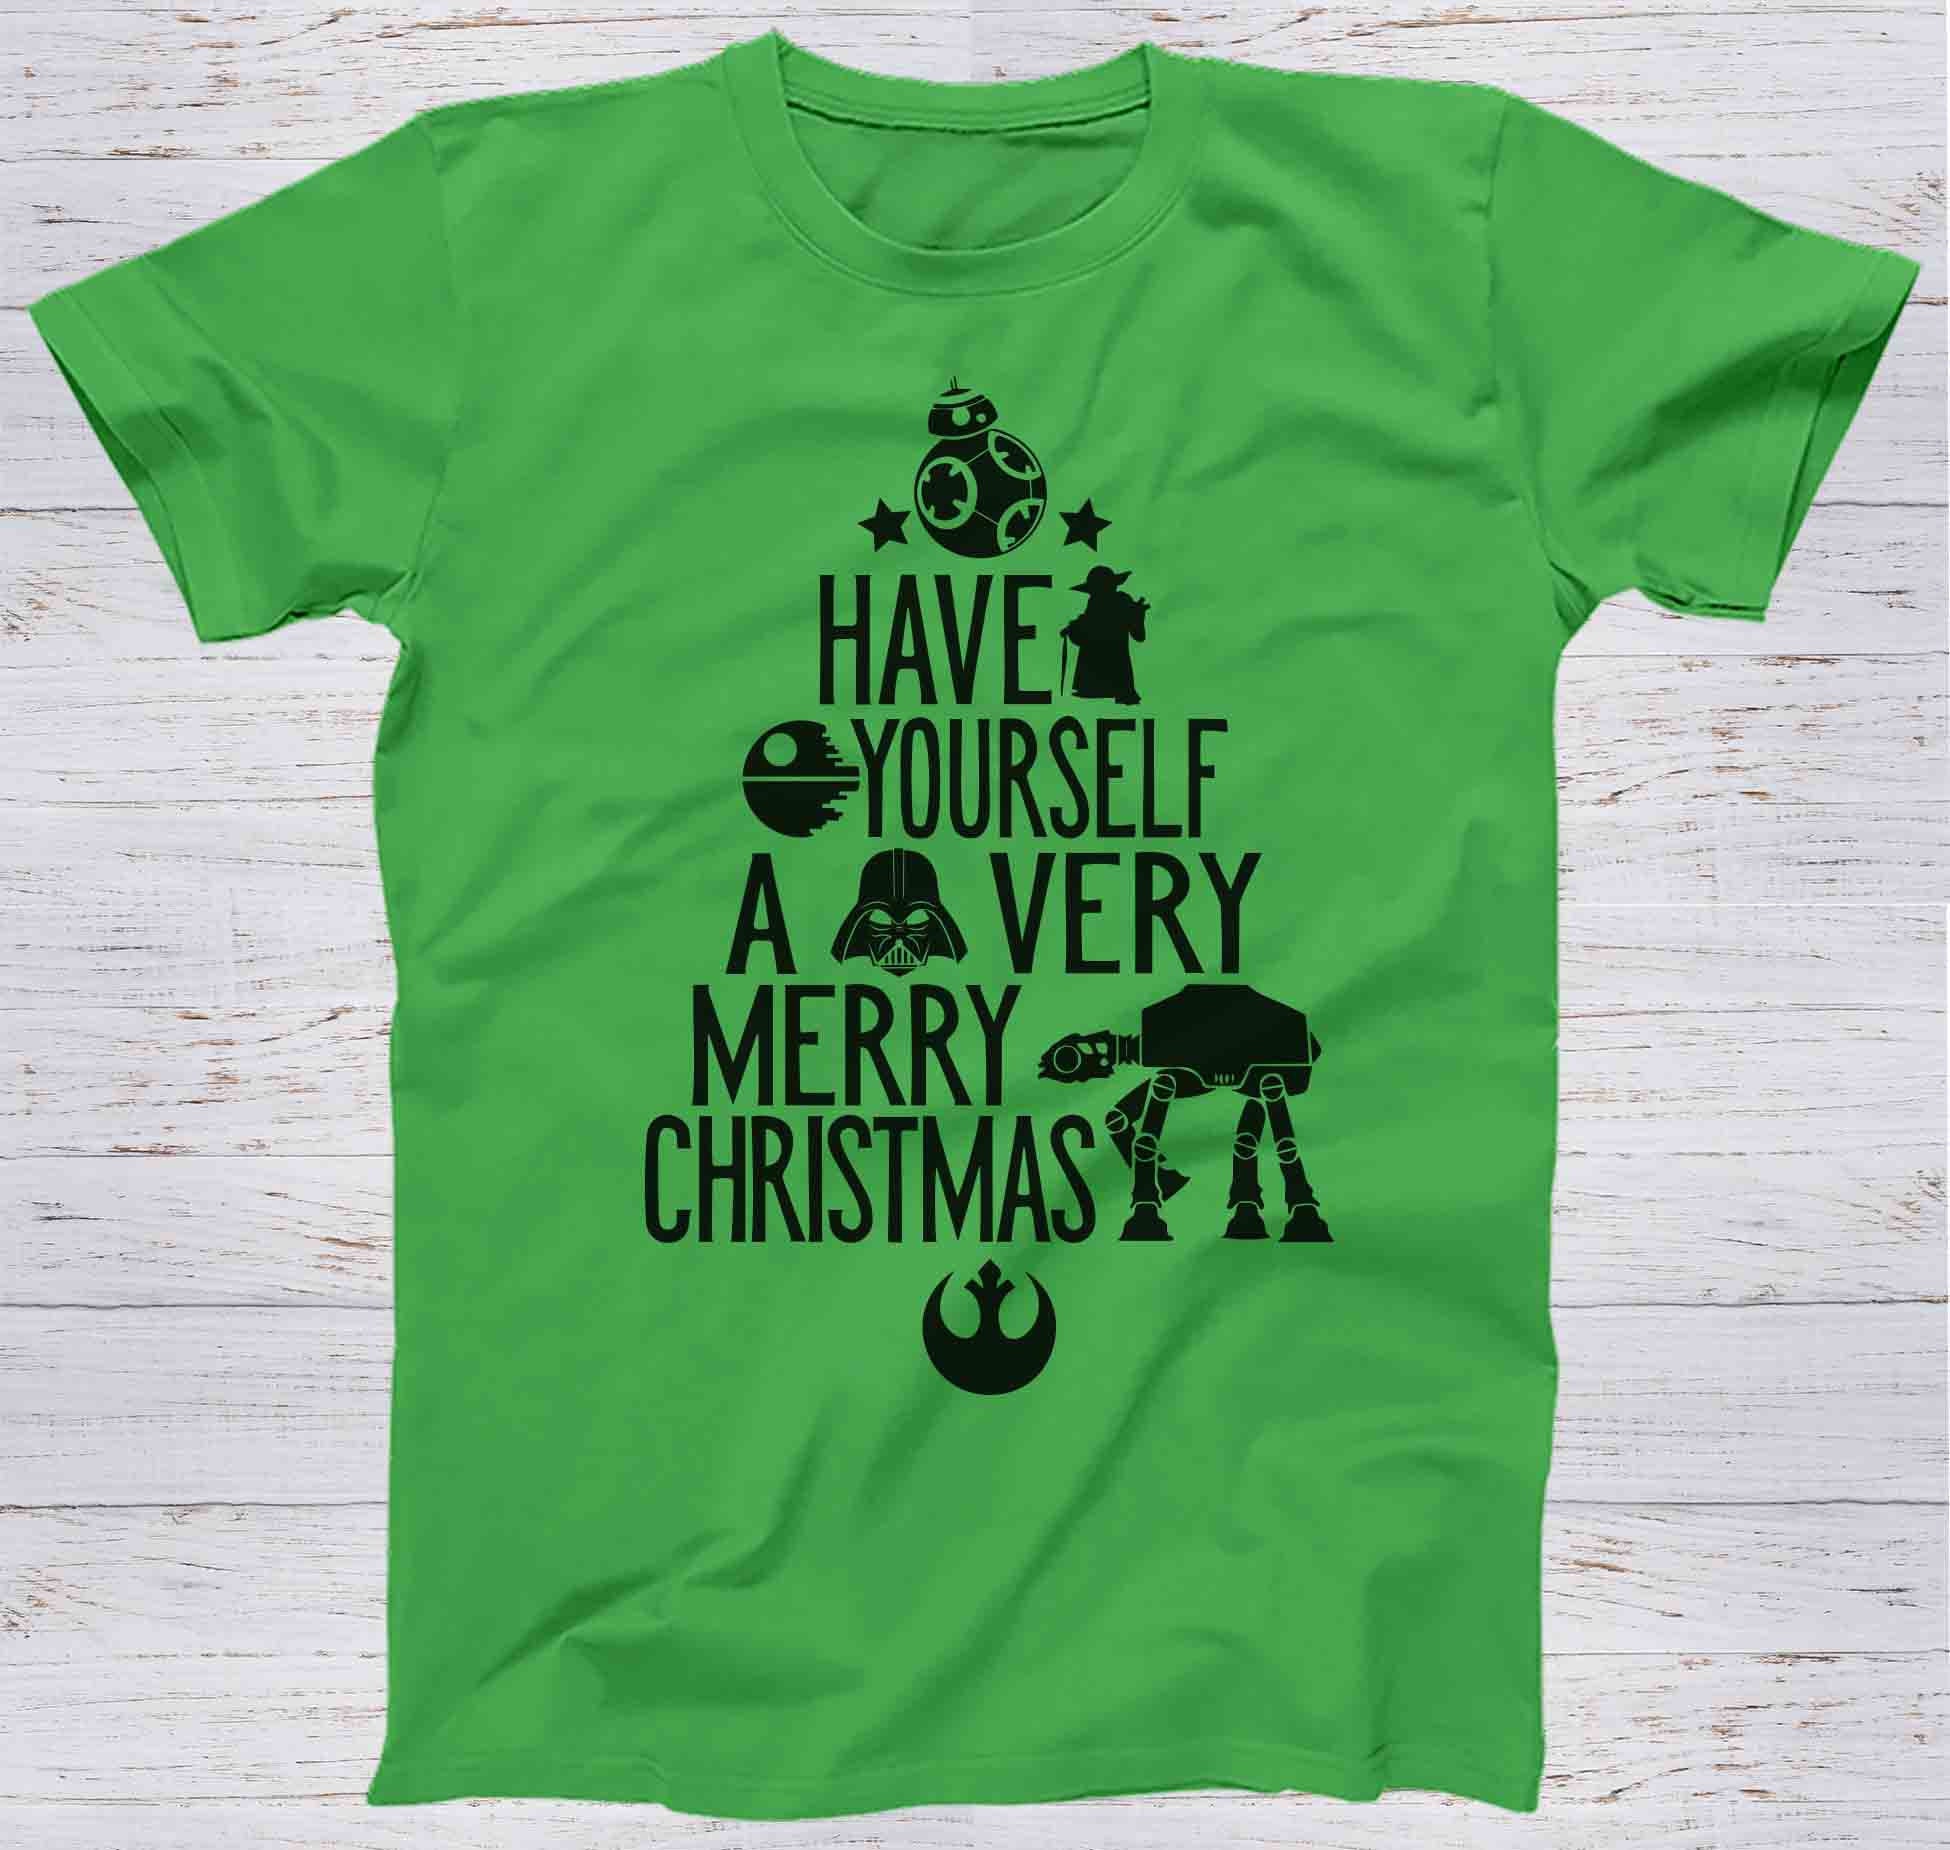 toevoegen aan Balling vijand Star Wars Have Yourself a Very Merry Christmas Shirts Disney - Etsy